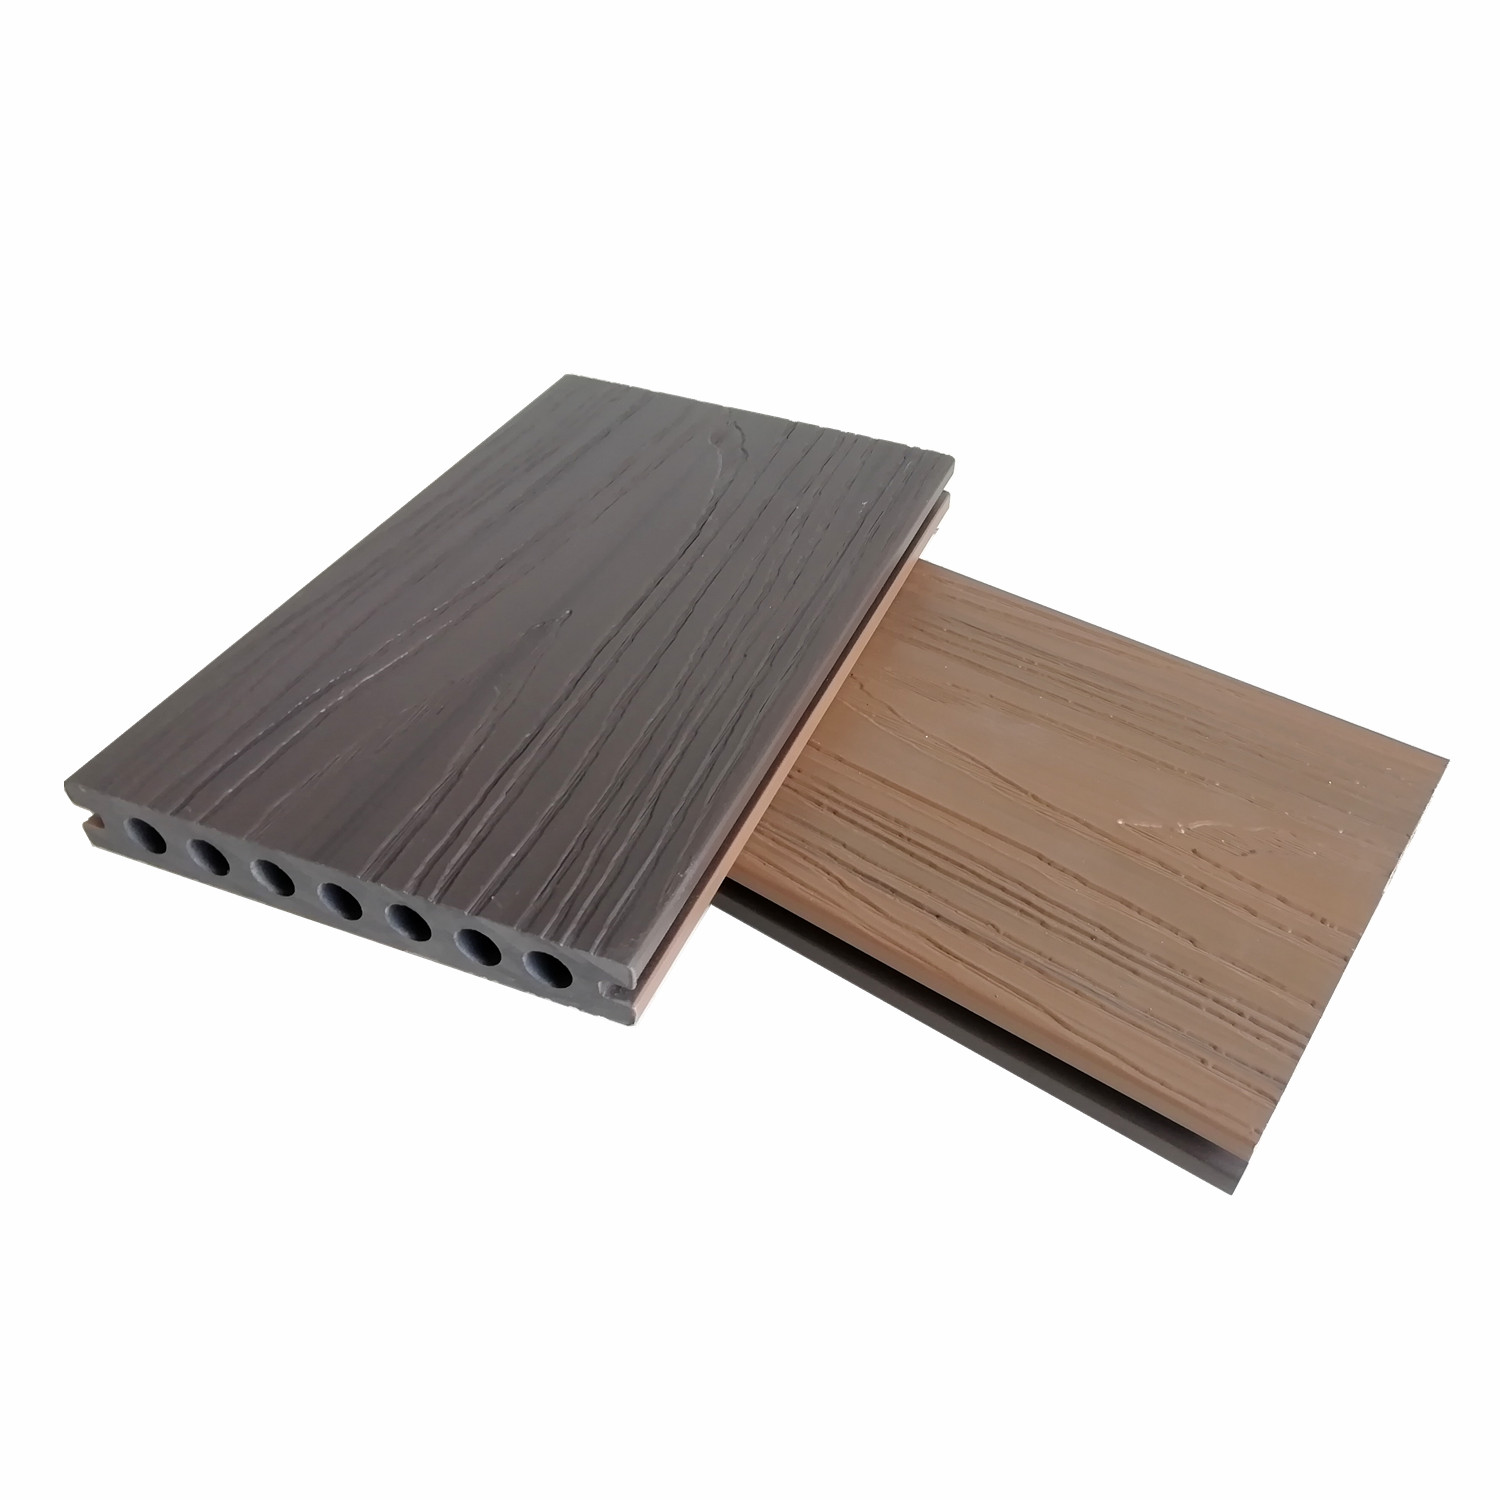 Boat Uv Resistant Pvc Plastic No Fading Fireproof Waterproof Decking Sale Wood Anti Technics Style Outdoor Lock Surface Graphic